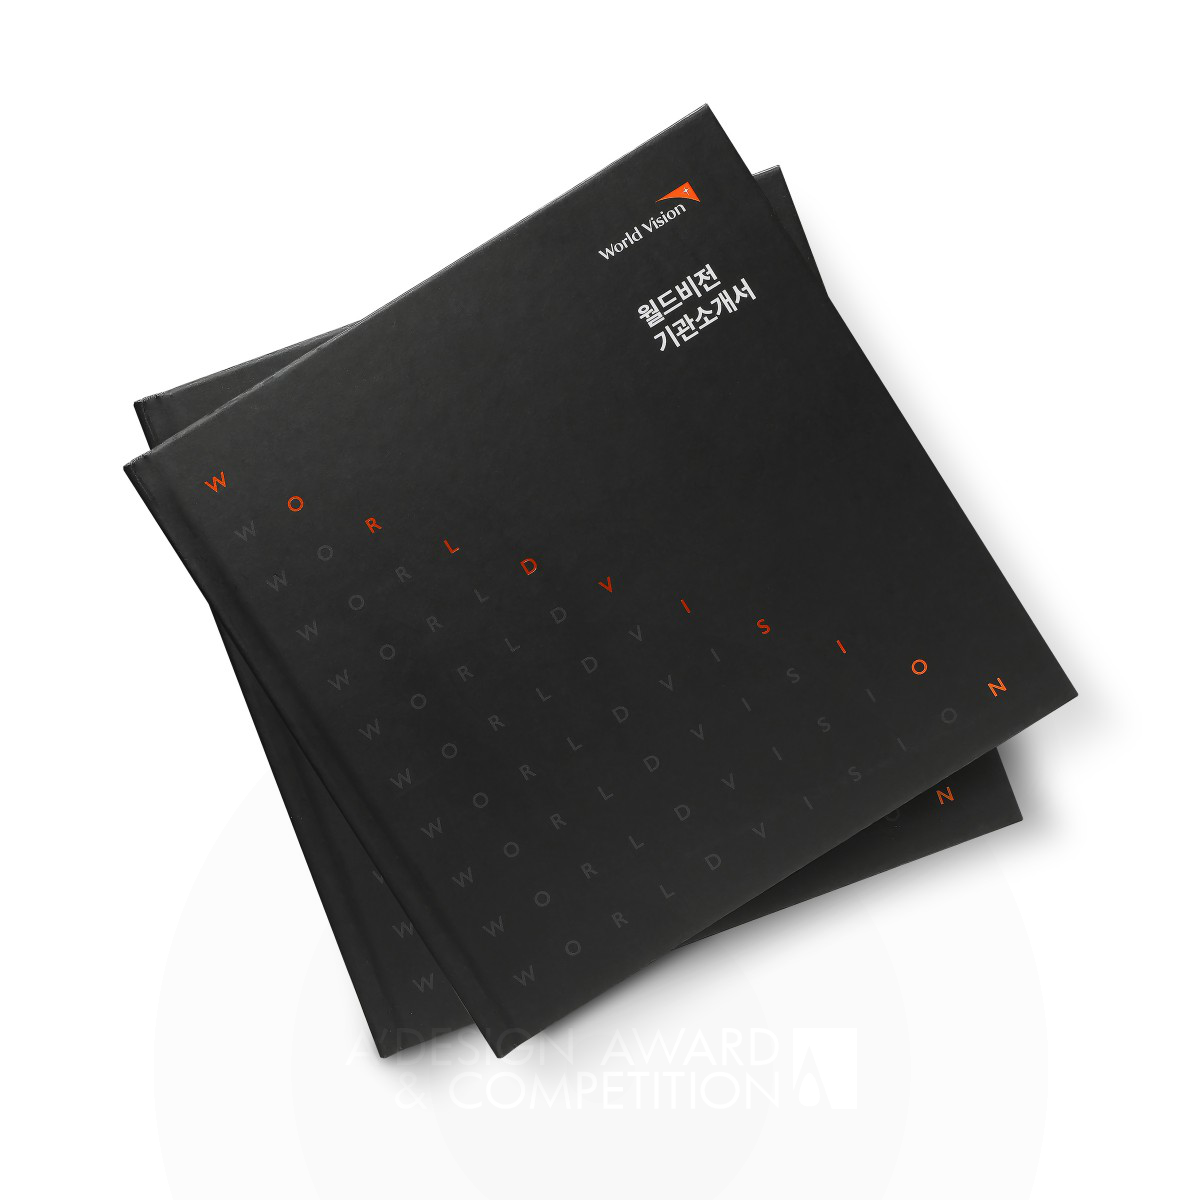 World Vision Organization Overview Book Design by Yunsik Son